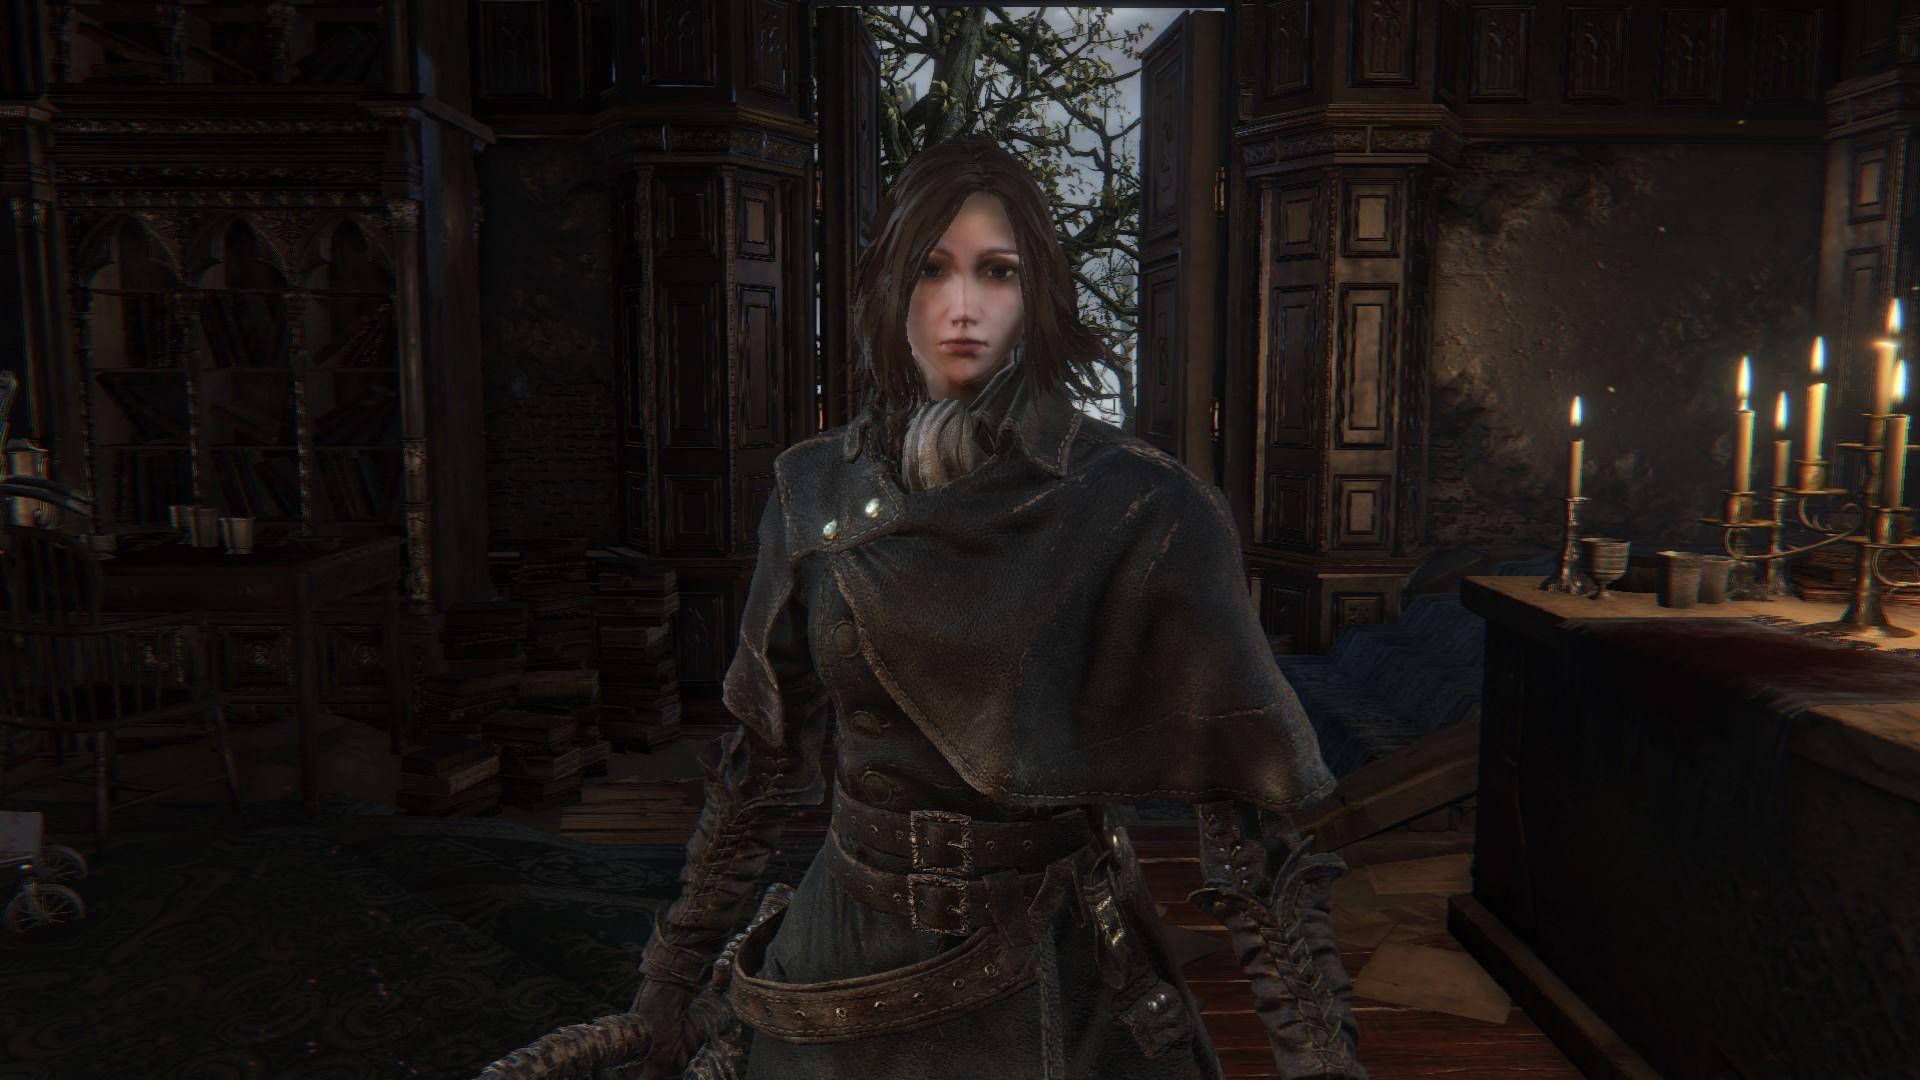 Anyone got some good looking female characters? 